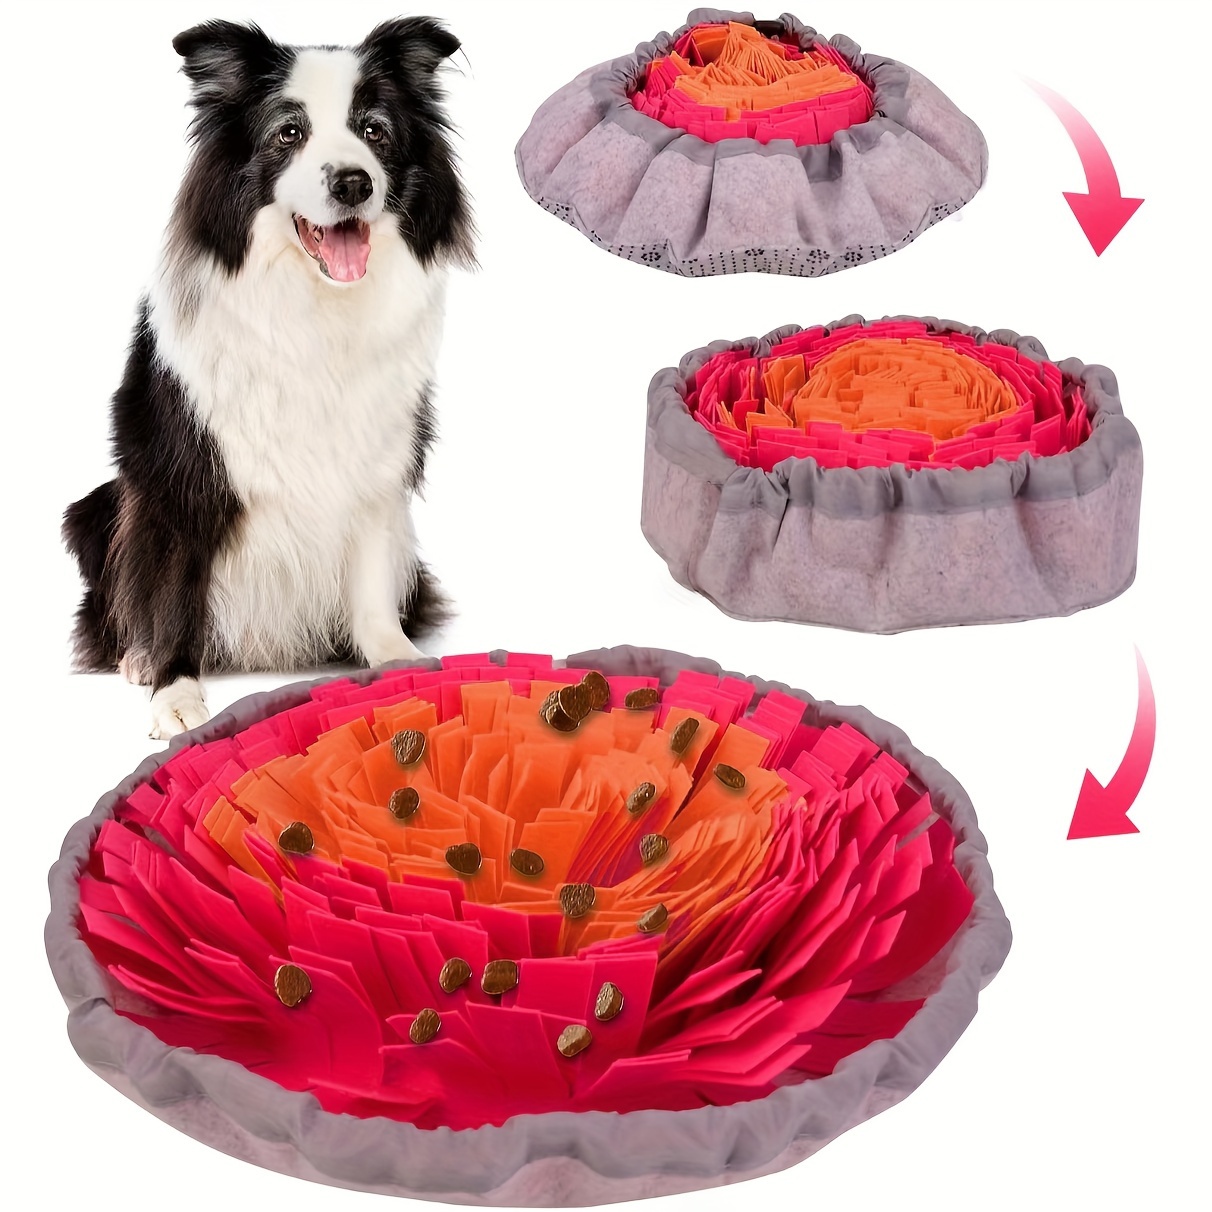 

Pet Snuffle Mat For Dogs, Interactive Dog Puzzle Feeding Toy, Slow Feeder Dog Bowl Alternative, Encourages Natural Foraging Skill